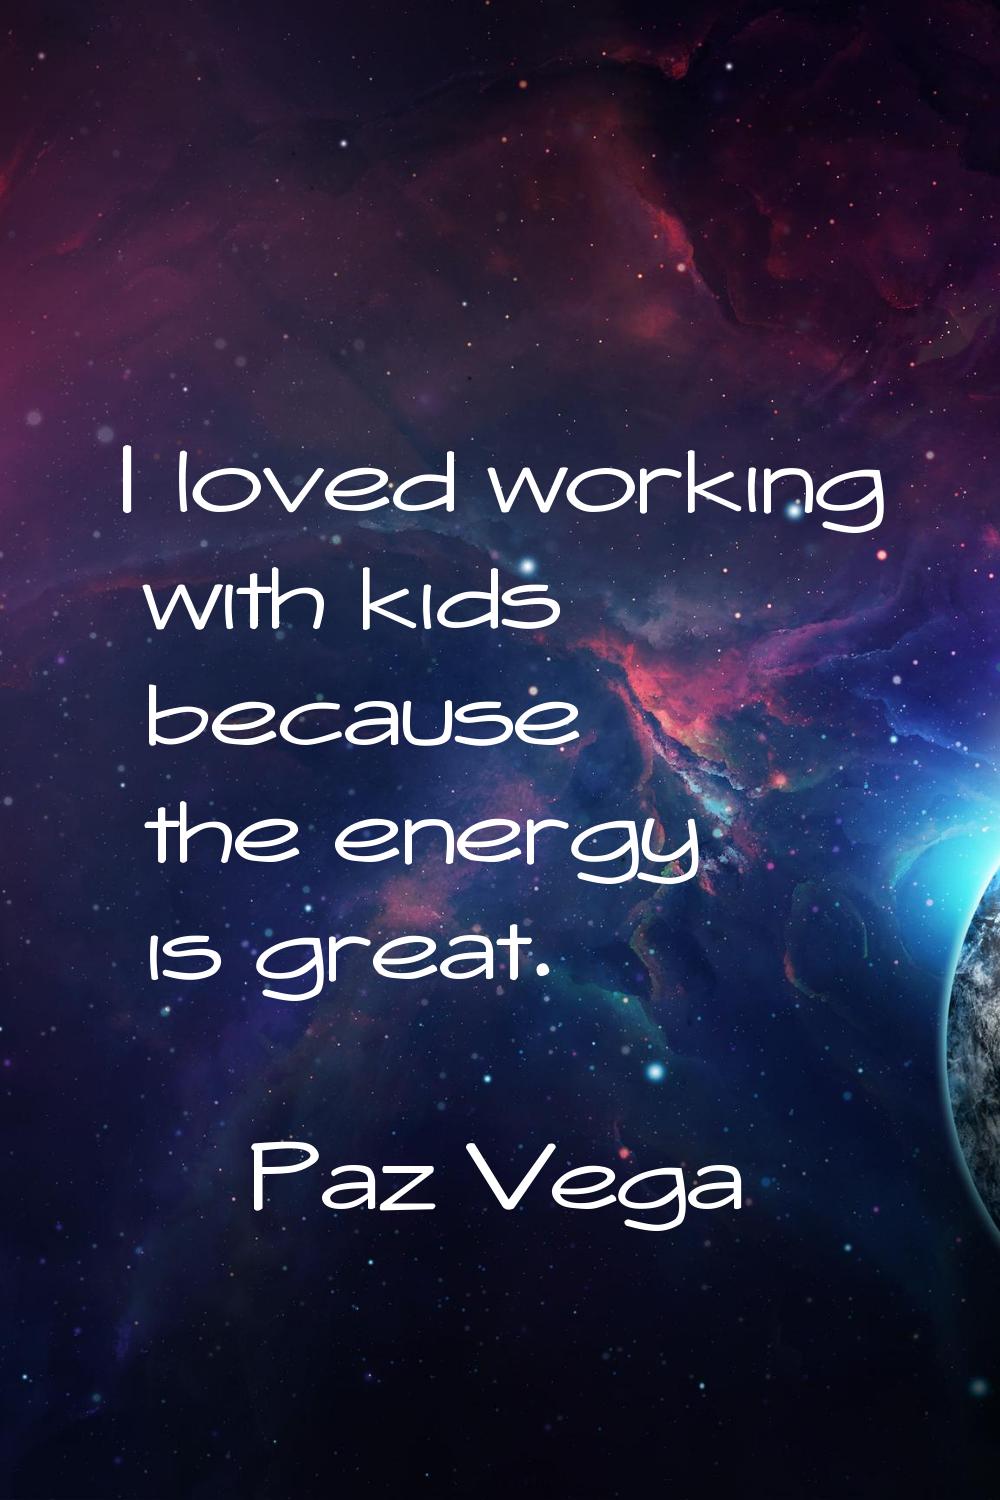 I loved working with kids because the energy is great.